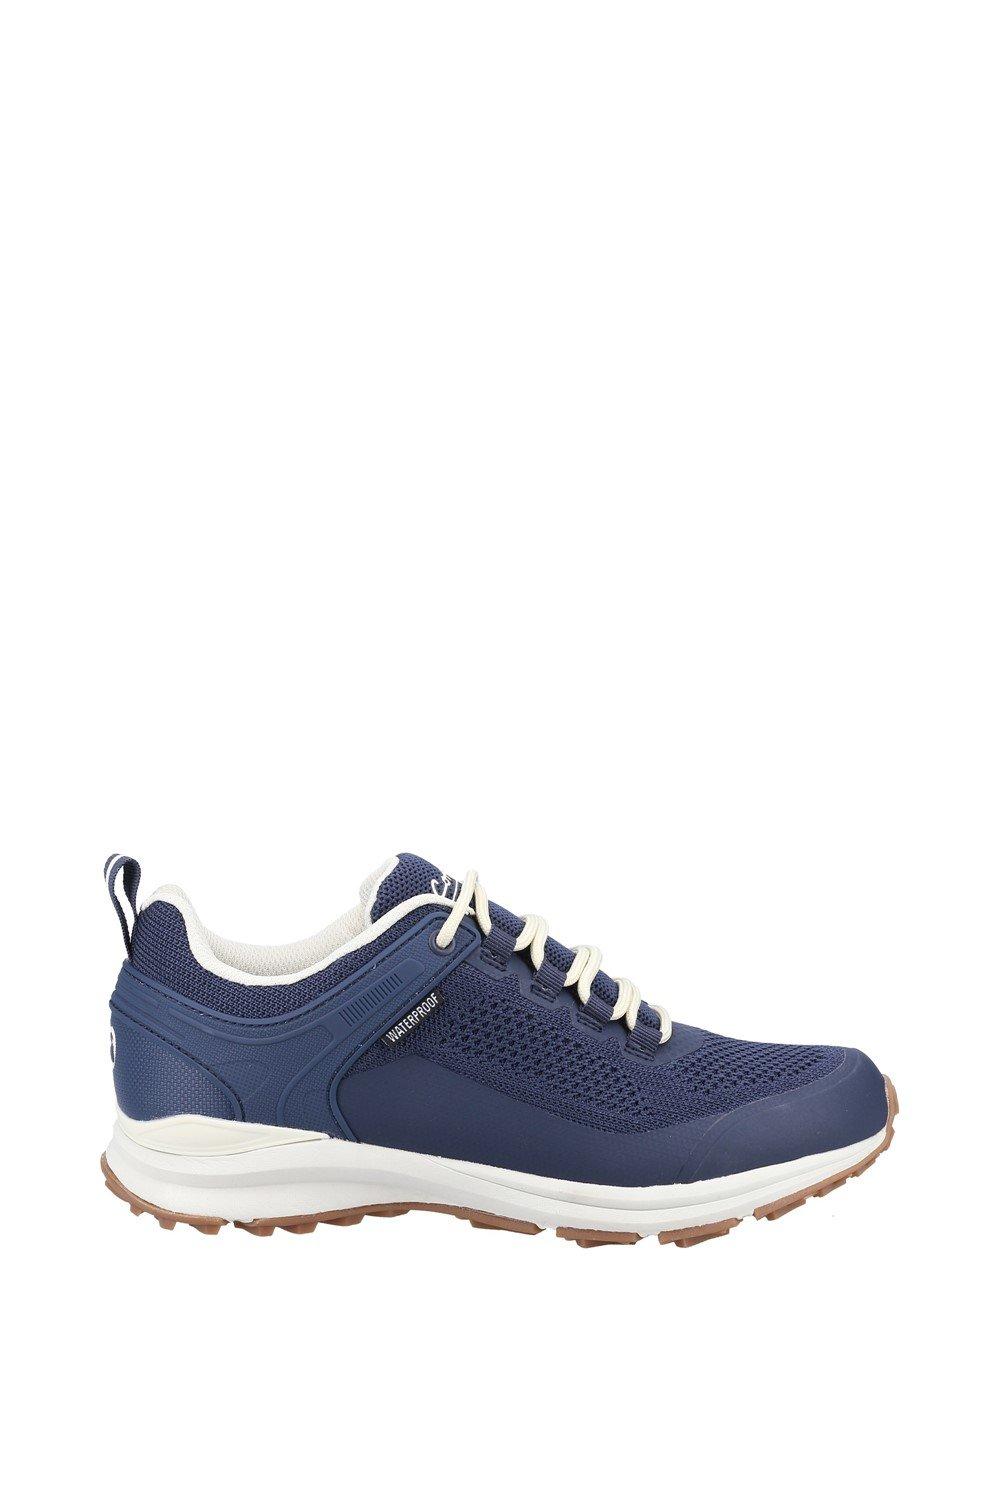 Cotswold Women's 'Compton' Hiking Shoes|Size: 4|navy